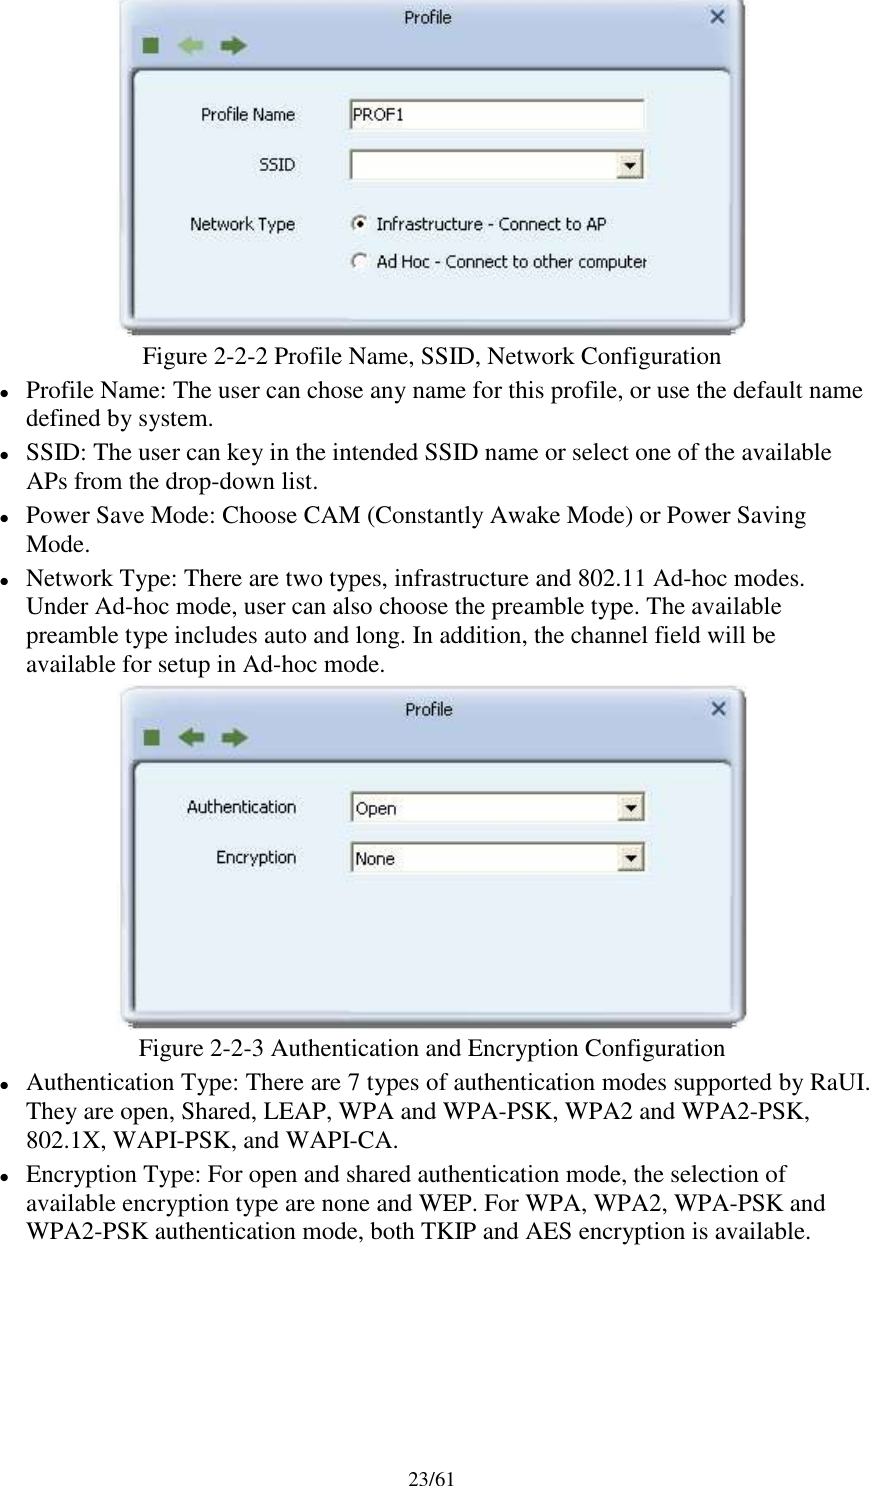 23/61Figure 2-2-2 Profile Name, SSID, Network ConfigurationProfile Name: The user can chose any name for this profile, or use the default namedefined by system.SSID: The user can key in the intended SSID name or select one of the availableAPs from the drop-down list.Power Save Mode: Choose CAM (Constantly Awake Mode) or Power SavingMode.Network Type: There are two types, infrastructure and 802.11 Ad-hoc modes.Under Ad-hoc mode, user can also choose the preamble type. The availablepreamble type includes auto and long. In addition, the channel field will beavailable for setup in Ad-hoc mode.Figure 2-2-3 Authentication and Encryption ConfigurationAuthentication Type: There are 7 types of authentication modes supported by RaUI.They are open, Shared, LEAP, WPA and WPA-PSK, WPA2 and WPA2-PSK,802.1X, WAPI-PSK, and WAPI-CA.Encryption Type: For open and shared authentication mode, the selection ofavailable encryption type are none and WEP. For WPA, WPA2, WPA-PSK andWPA2-PSK authentication mode, both TKIP and AES encryption is available.